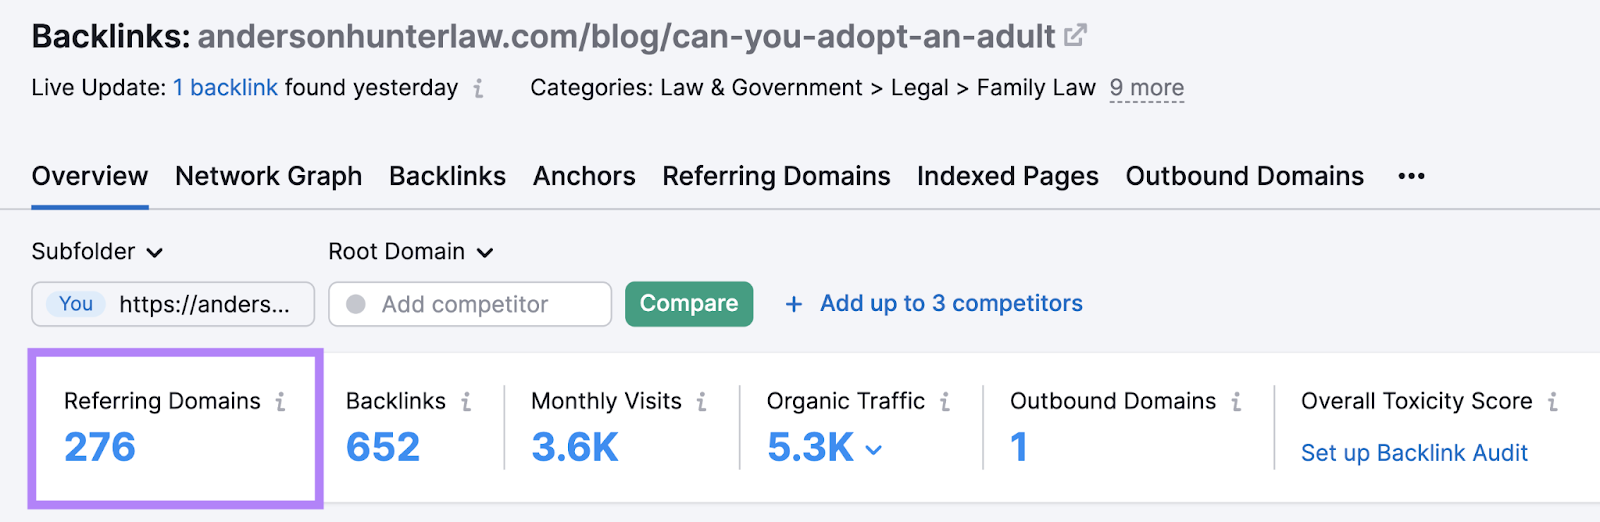 Backlink Analytics tool results for Anderson Hunter Law Firm’s post about ***** adoption